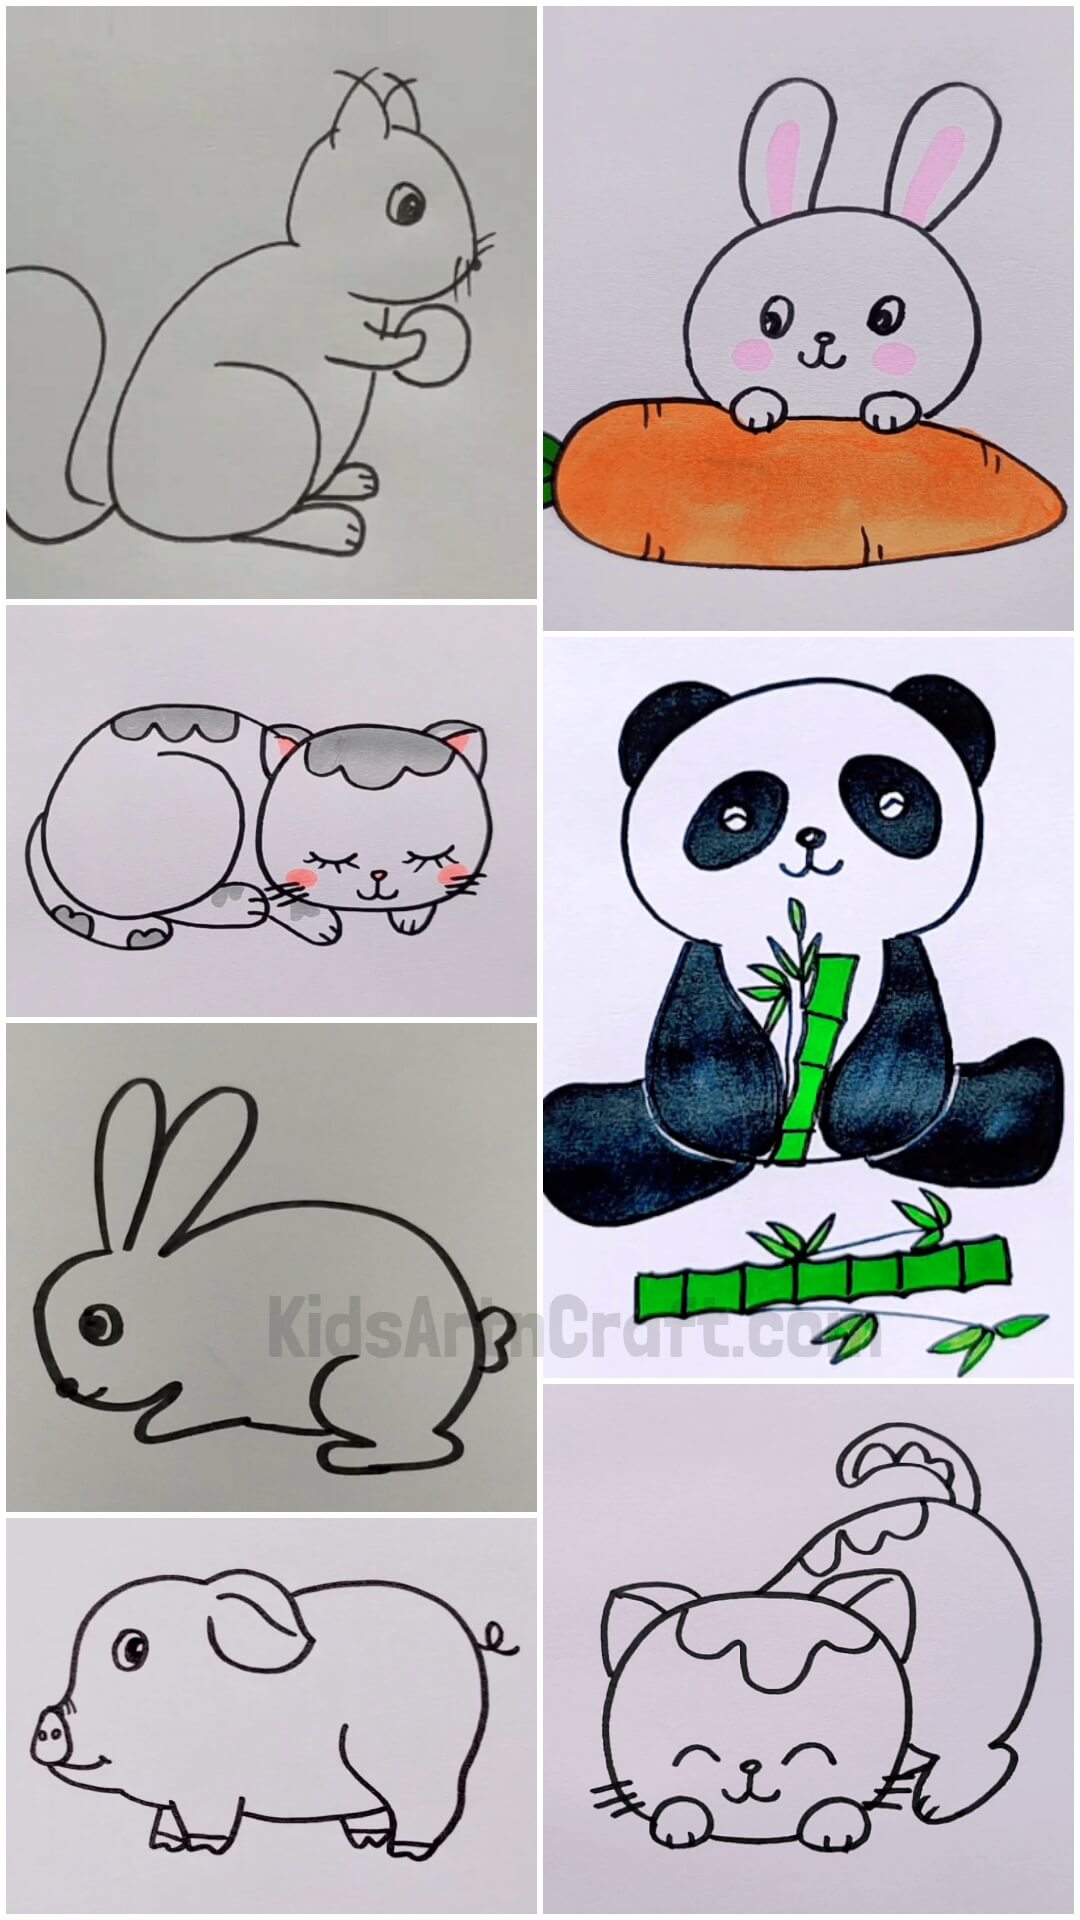 Teach Kids To Draw in An Easy Way